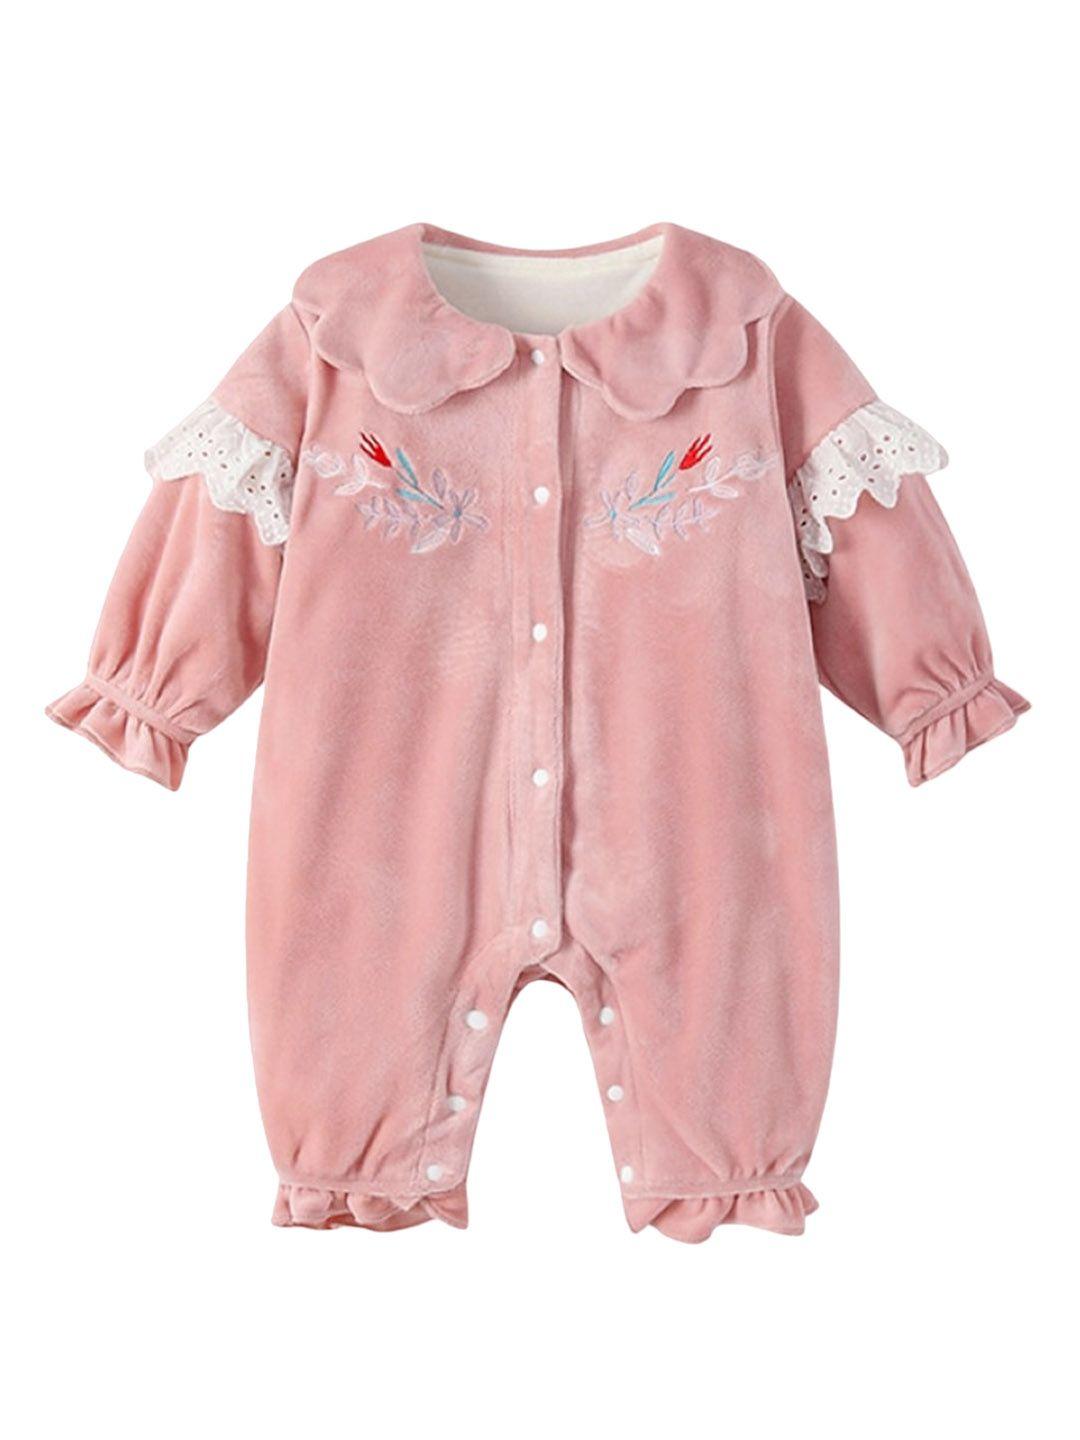 stylecast-infant-girls-pink-round-neck-rompers